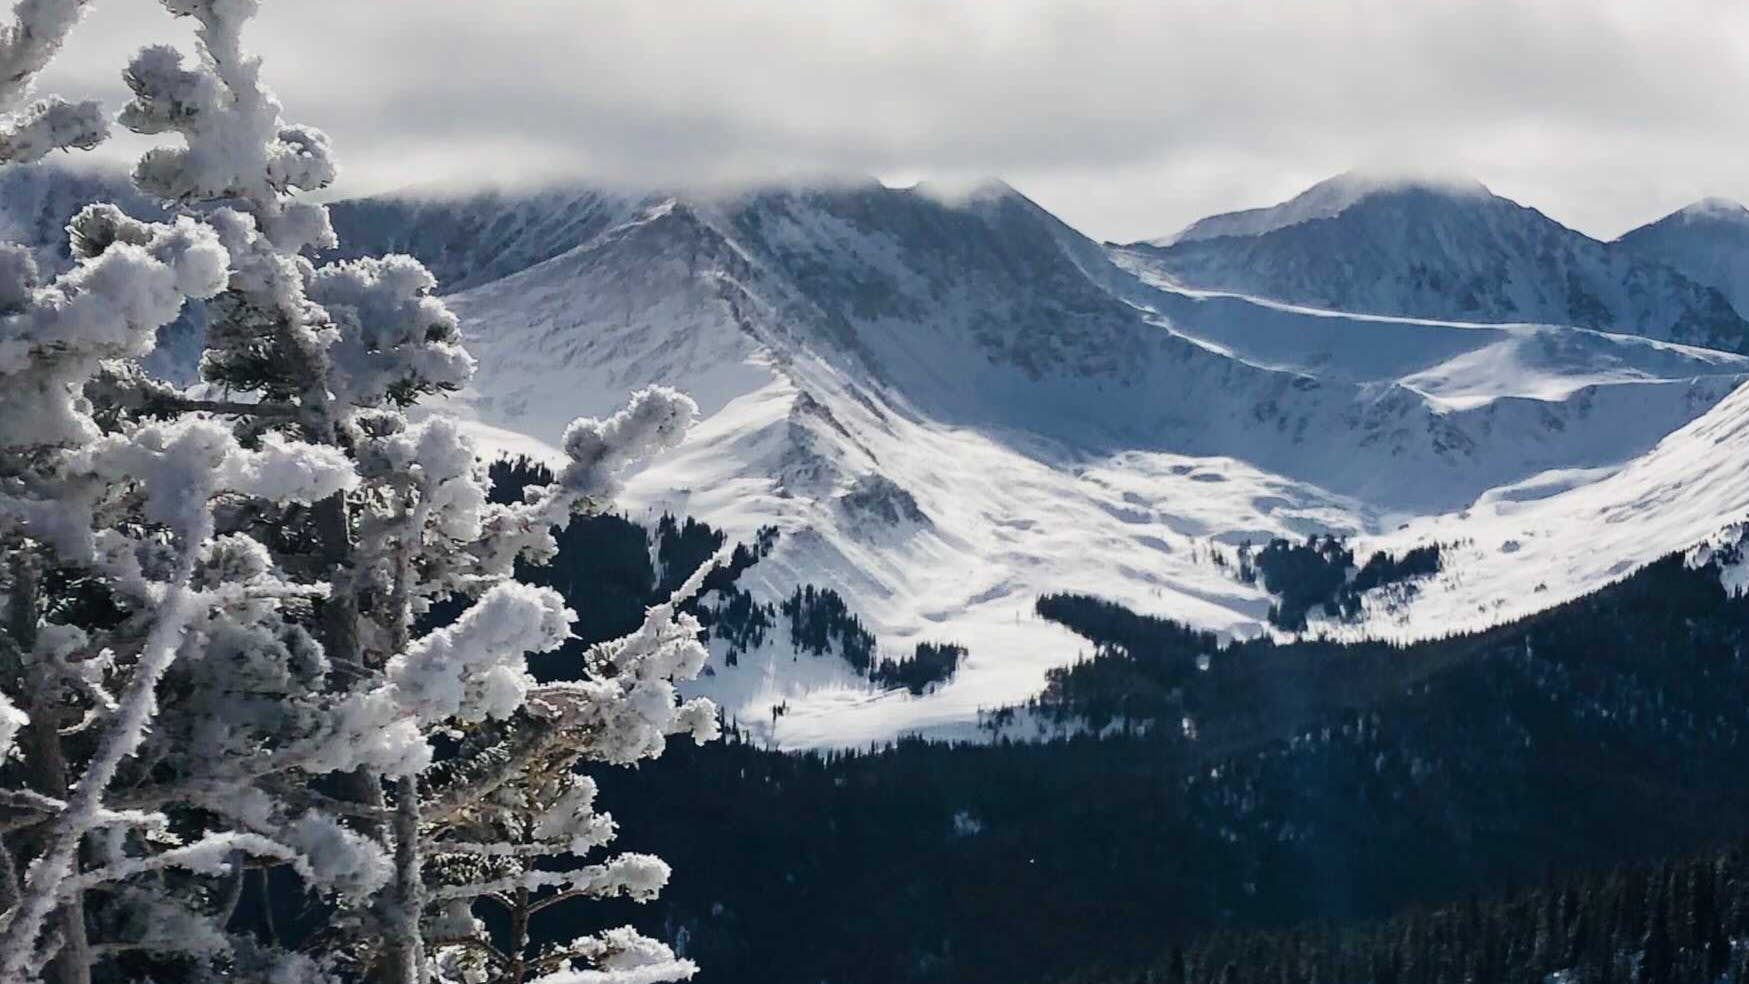 A snow mountain view from a slope of Copper Mountain Ski Resort.